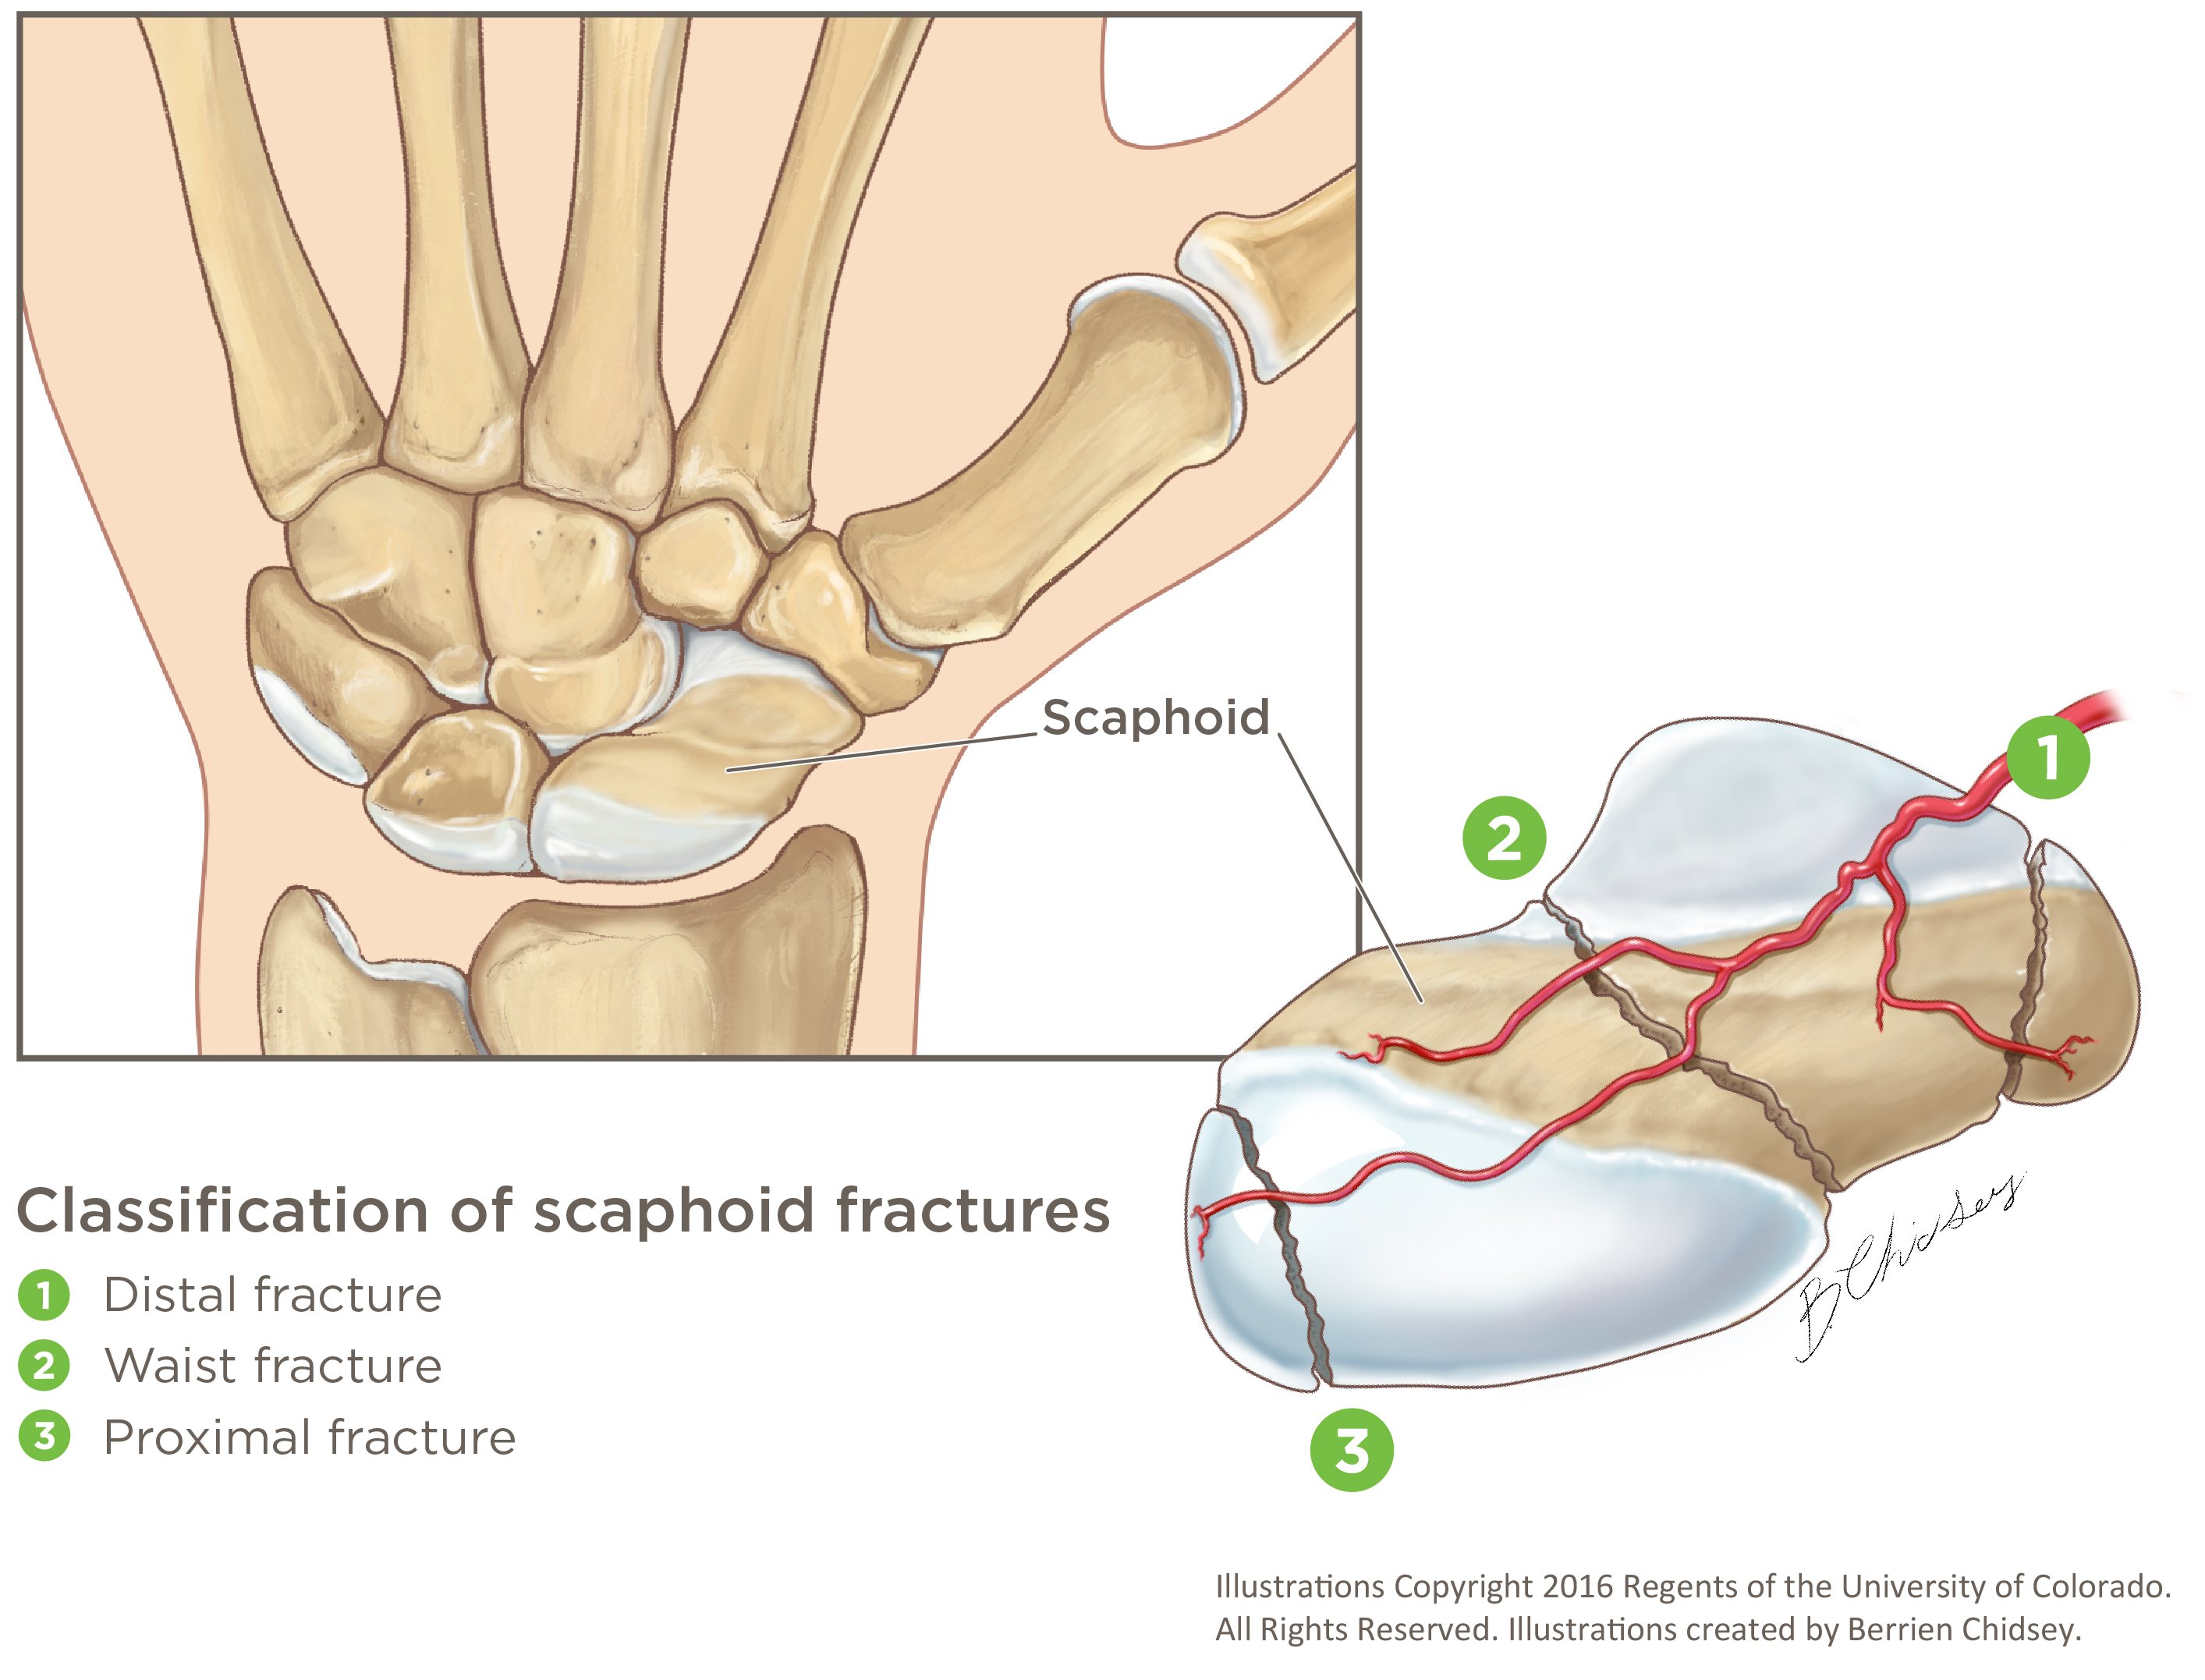 A graphic illustration of three types of scaphoid fractures: distal, waist and proximal.